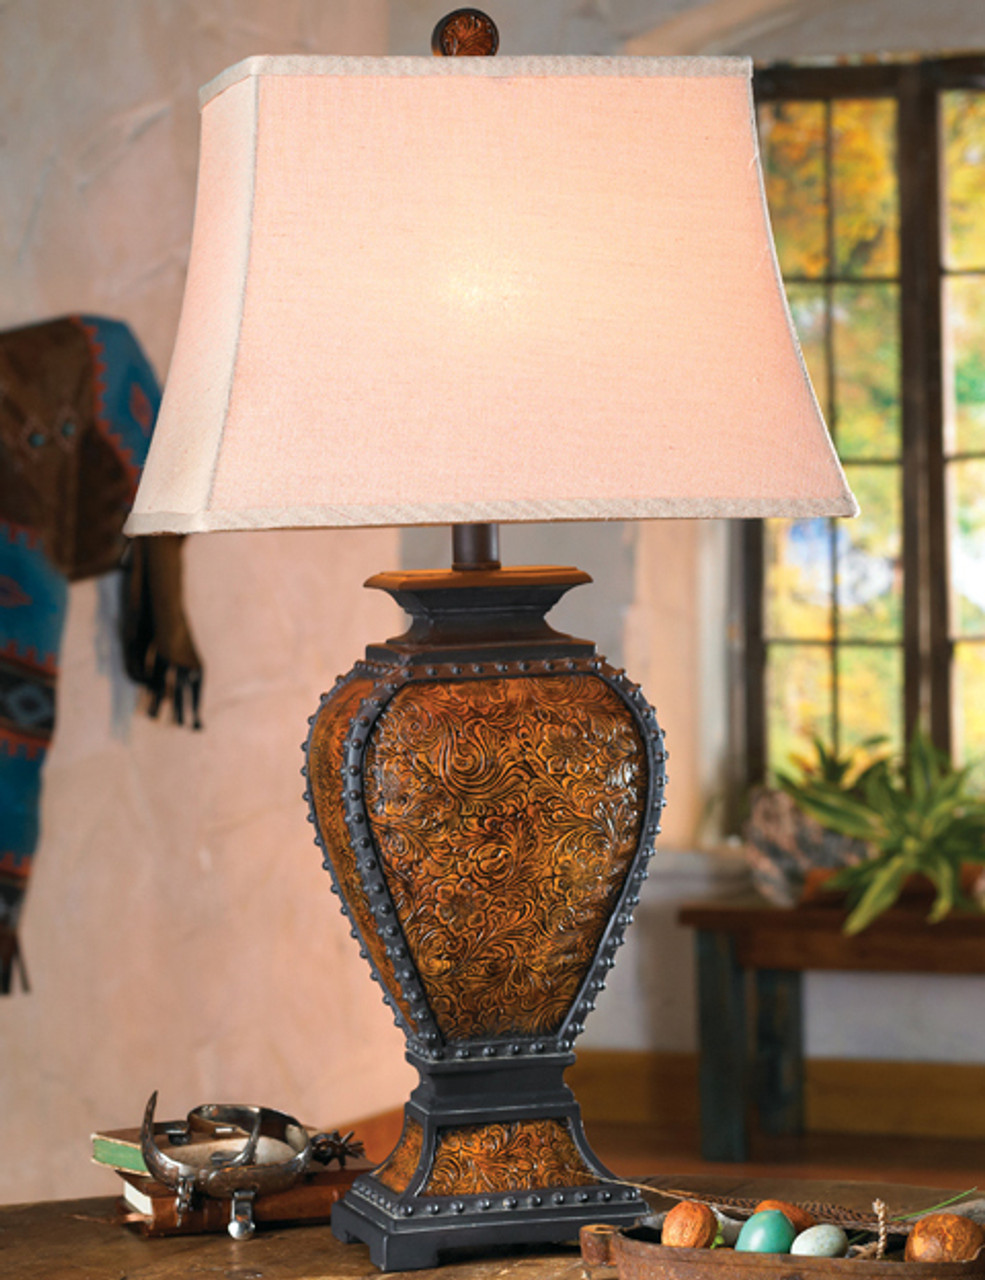 Faux Tooled Leather - Rustic Lighting & Fans